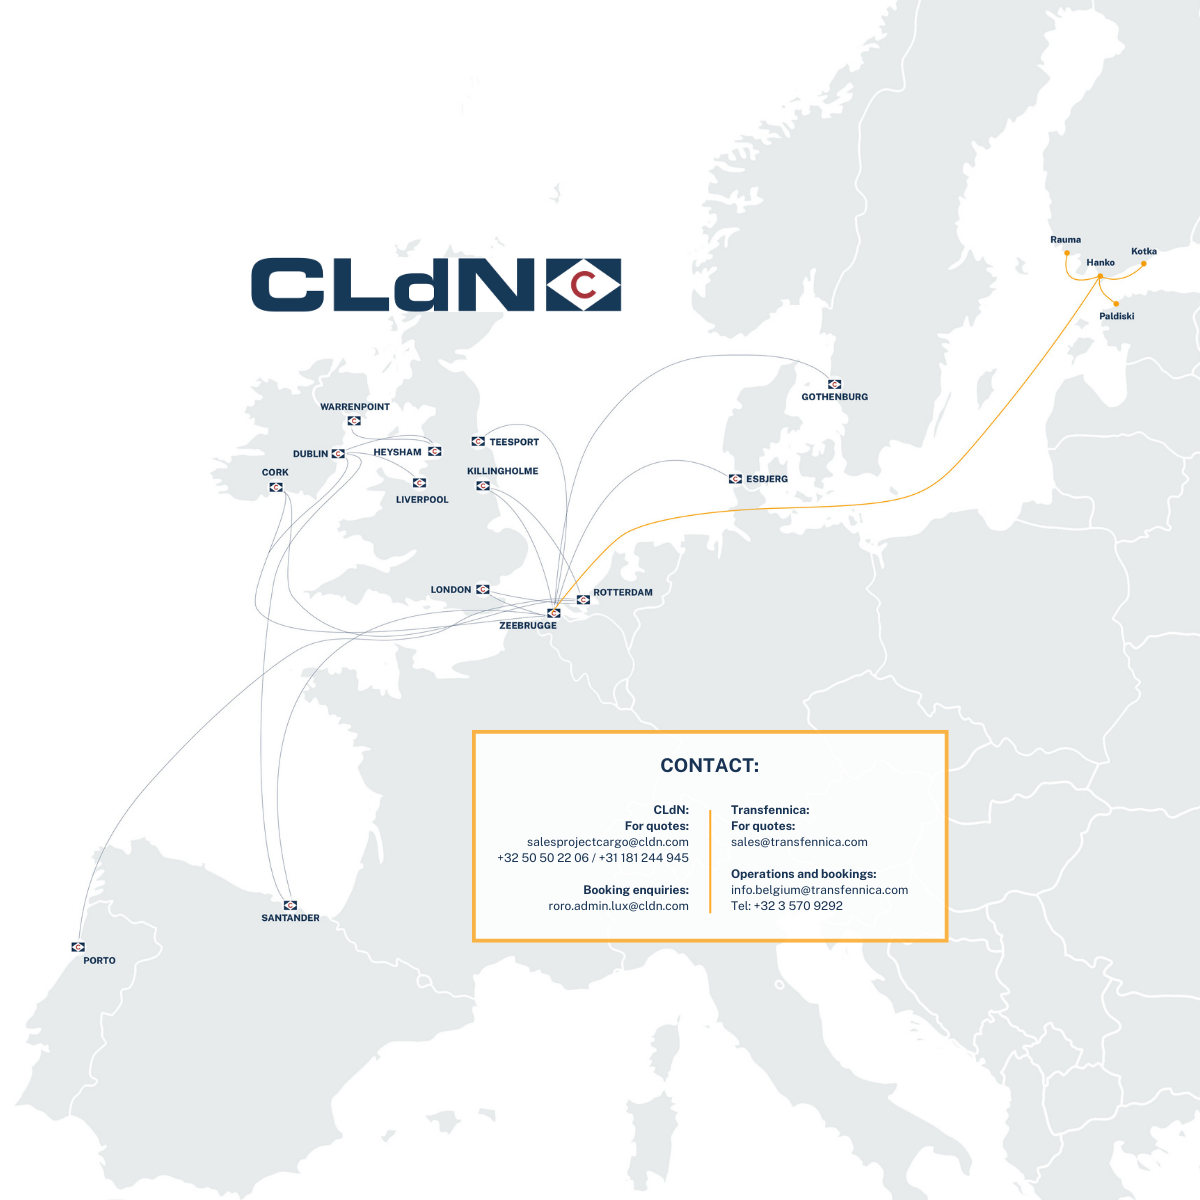 CLdN establishes Baltic connection with Transfennica